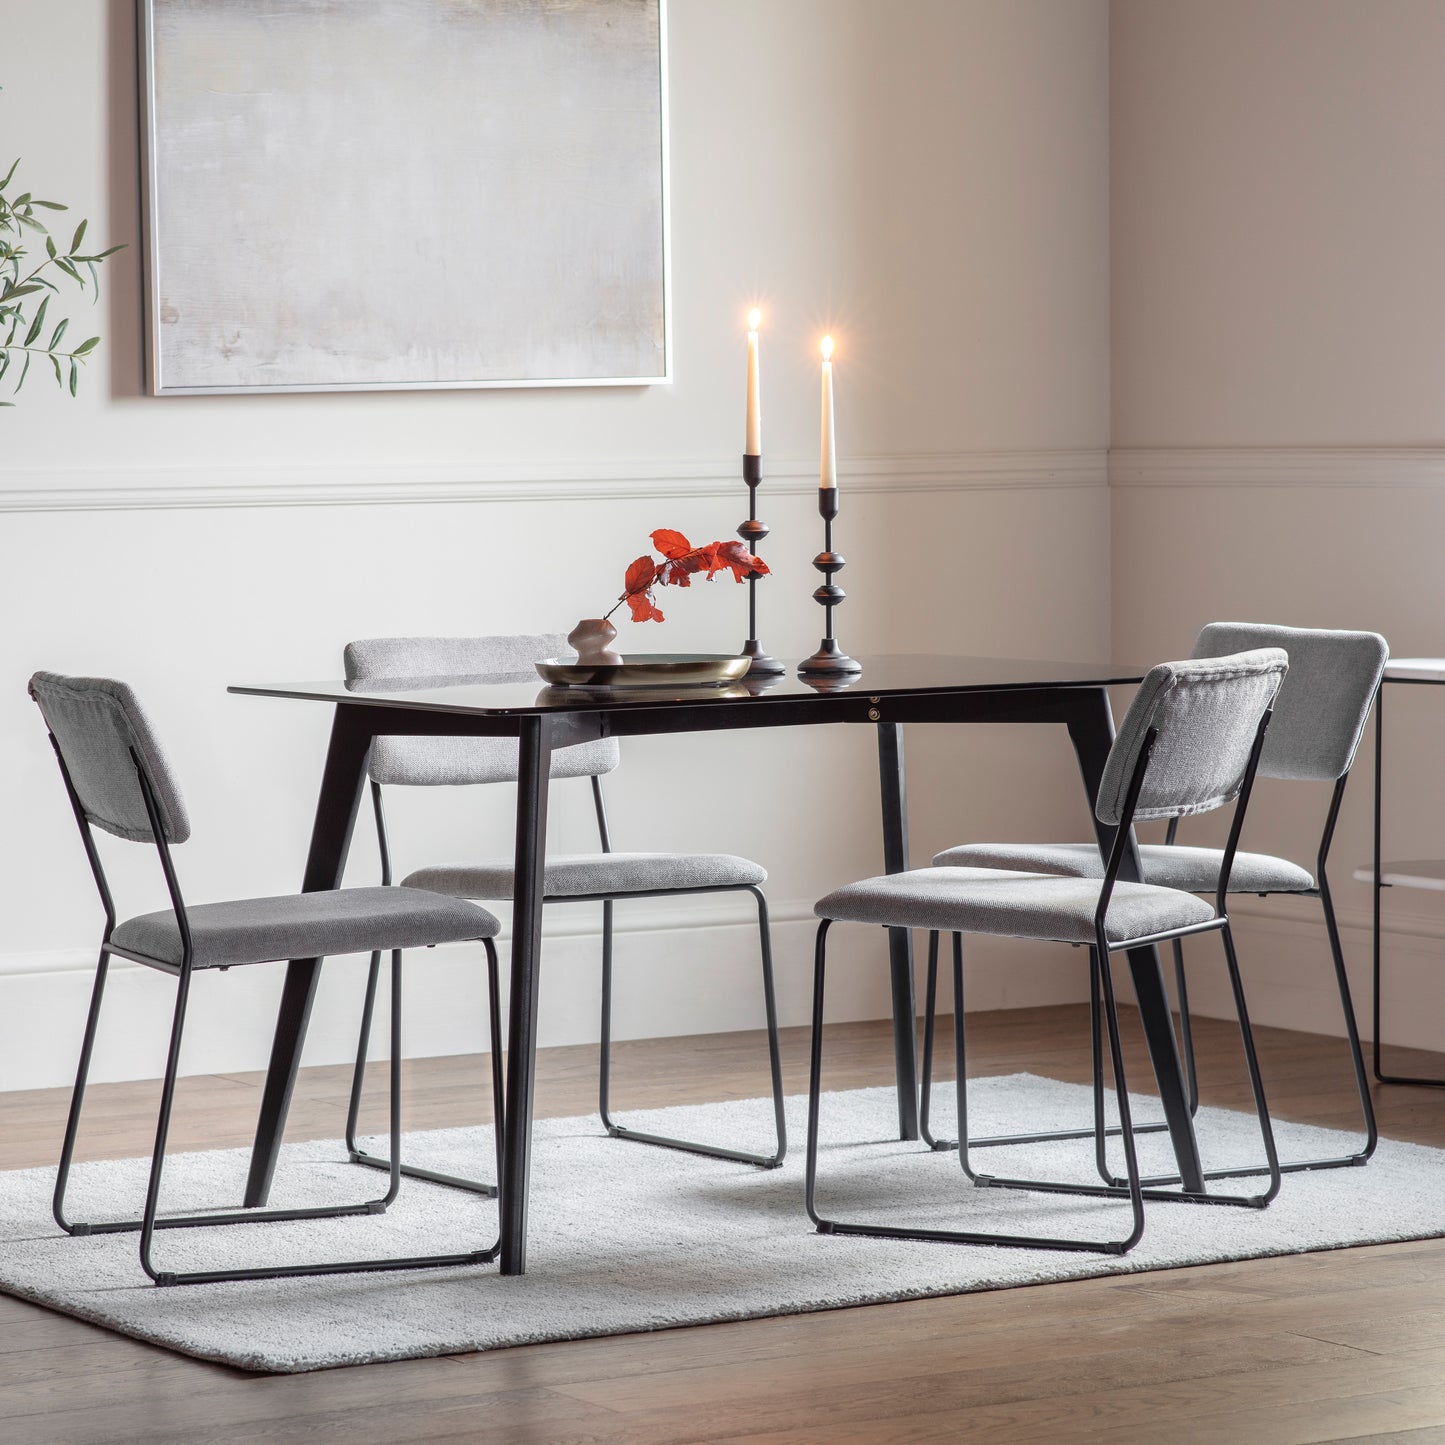 An Ashprington Rectangle Dining Table Black 1200x800x750mm with four chairs and a vase, perfect for interior decor and home furniture, from Kikiathome.co.uk.